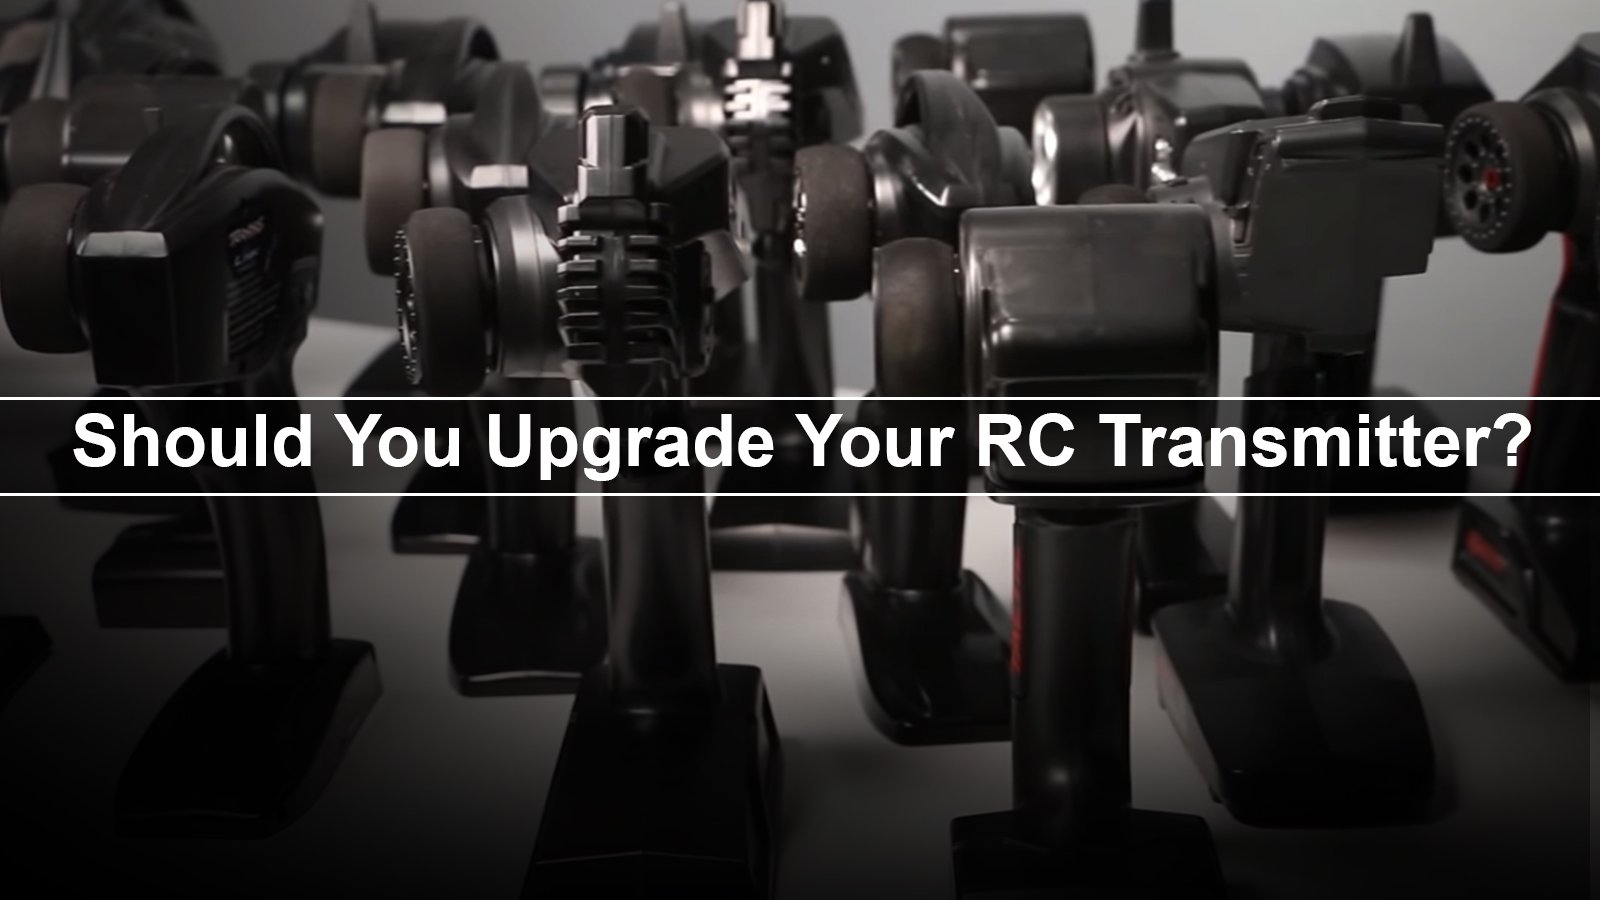 Should you upgrade your RC transmitter?